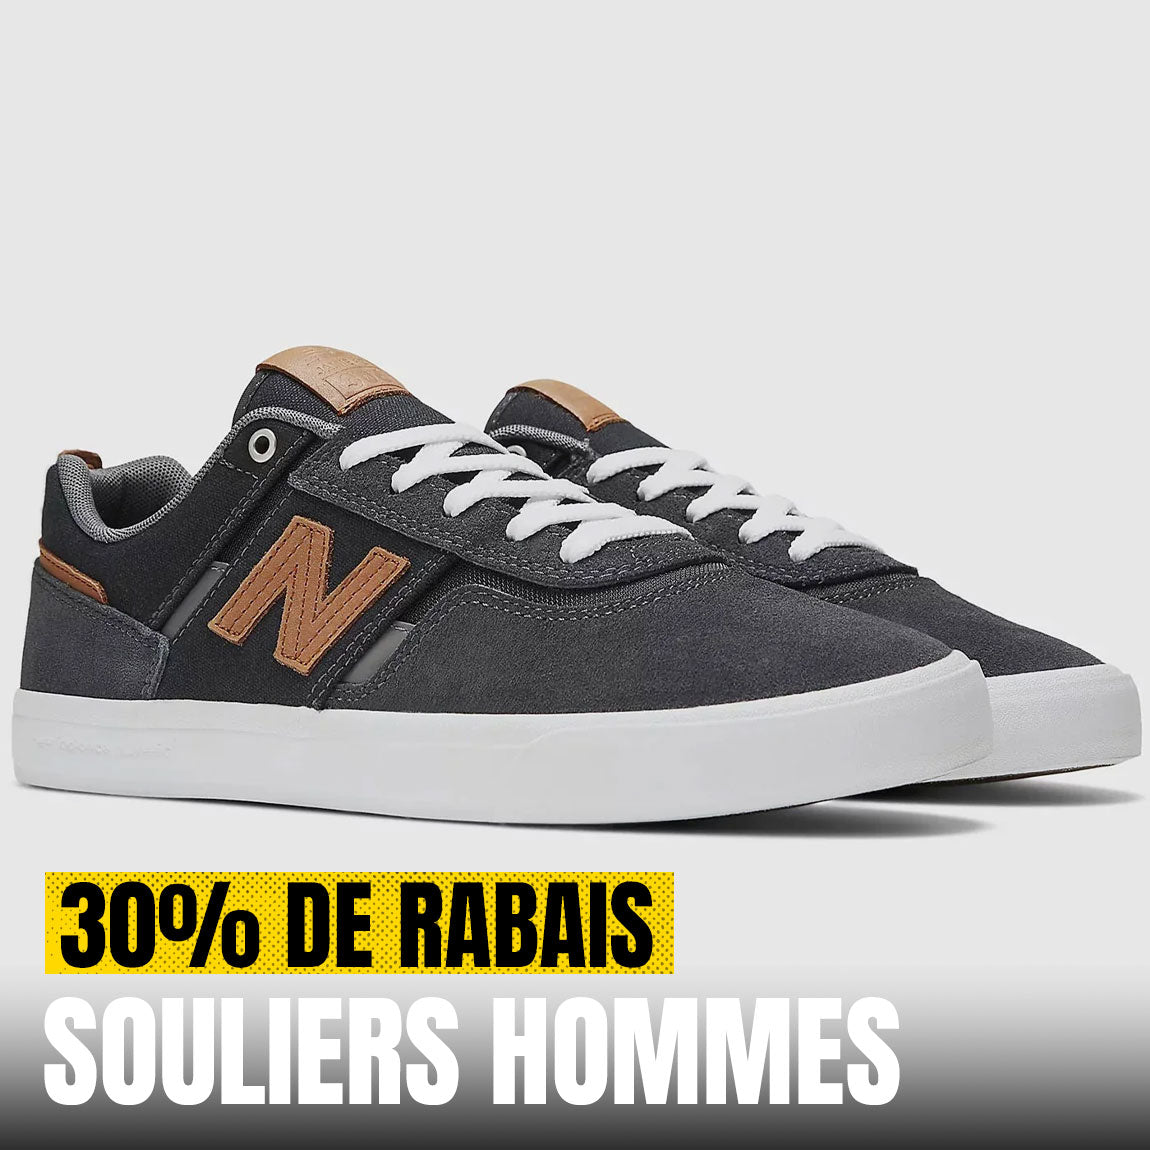 SOULIERS HOMMES